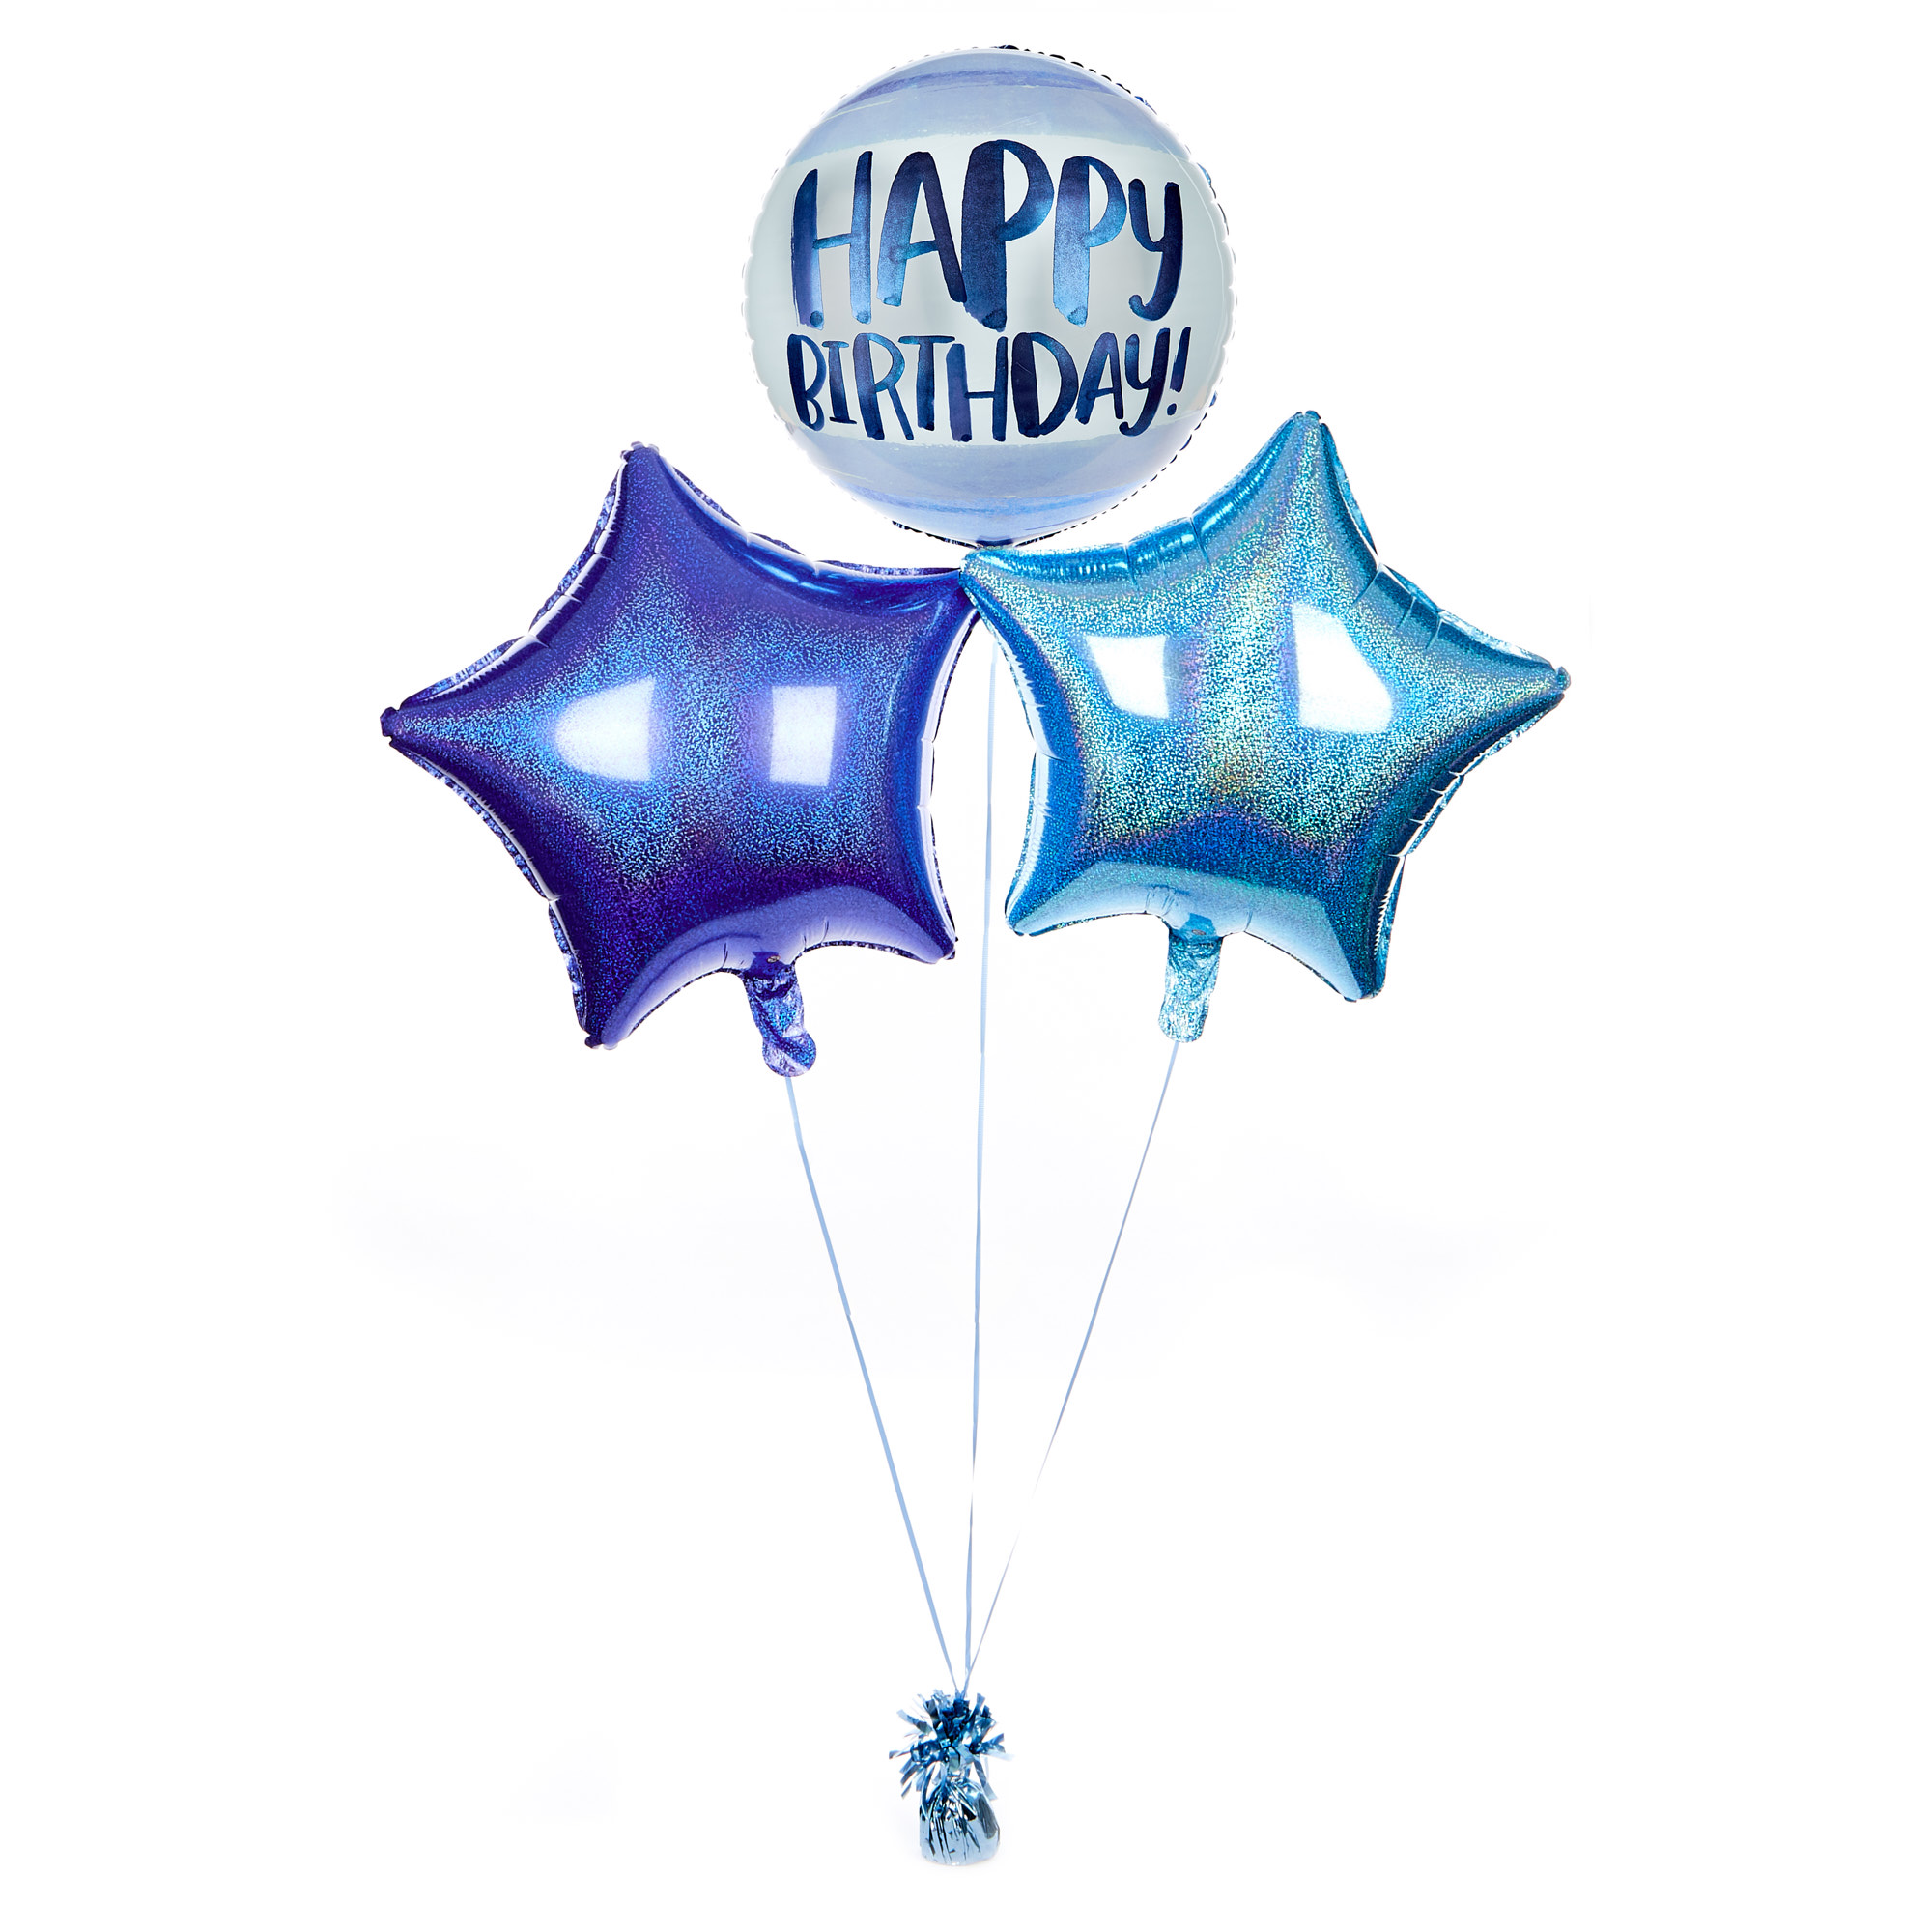 Blue Watercolour Happy Birthday Balloon Bouquet - DELIVERED INFLATED!